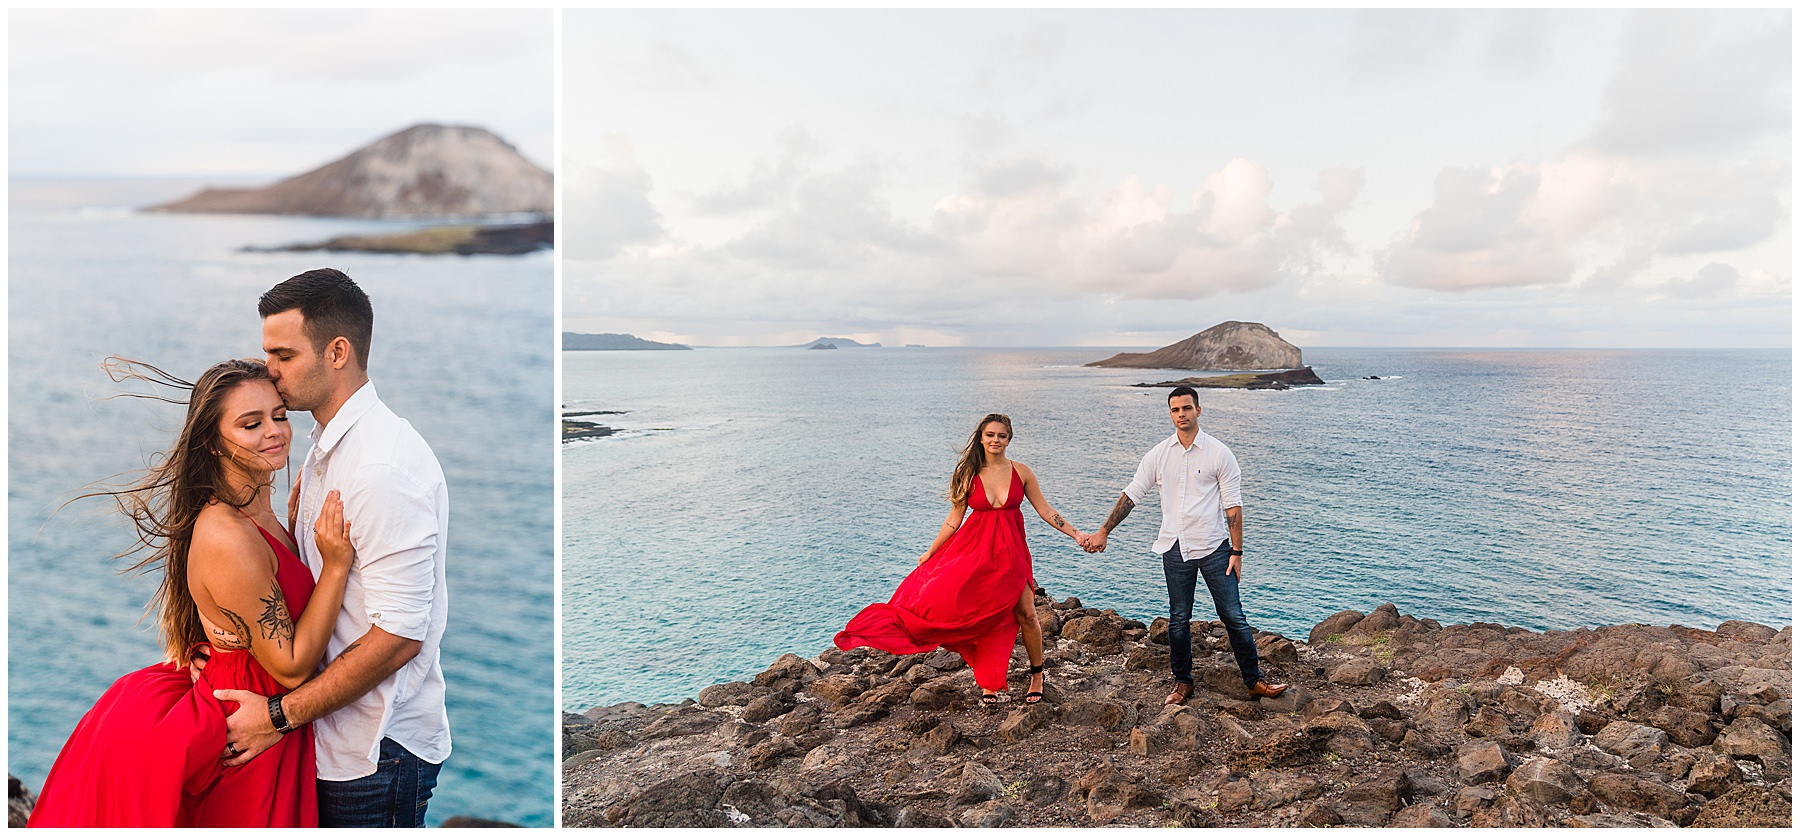 Couple taking photos by the ocean in Hawaii